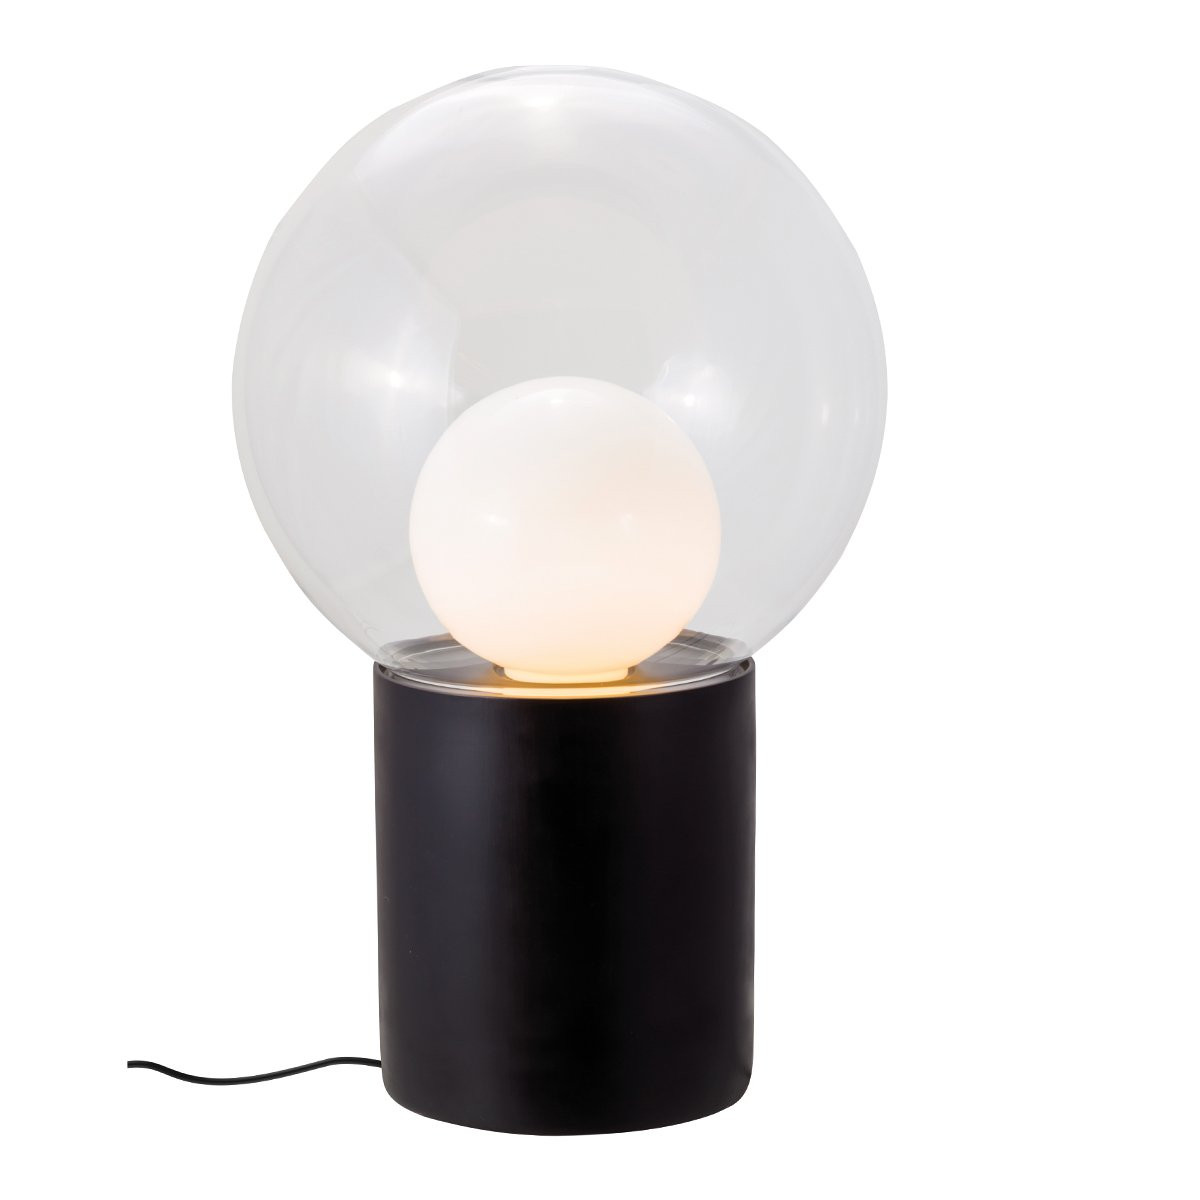 Pulpo Boule High Vloerlamp - Zwart / Transparant / Opaal Wit